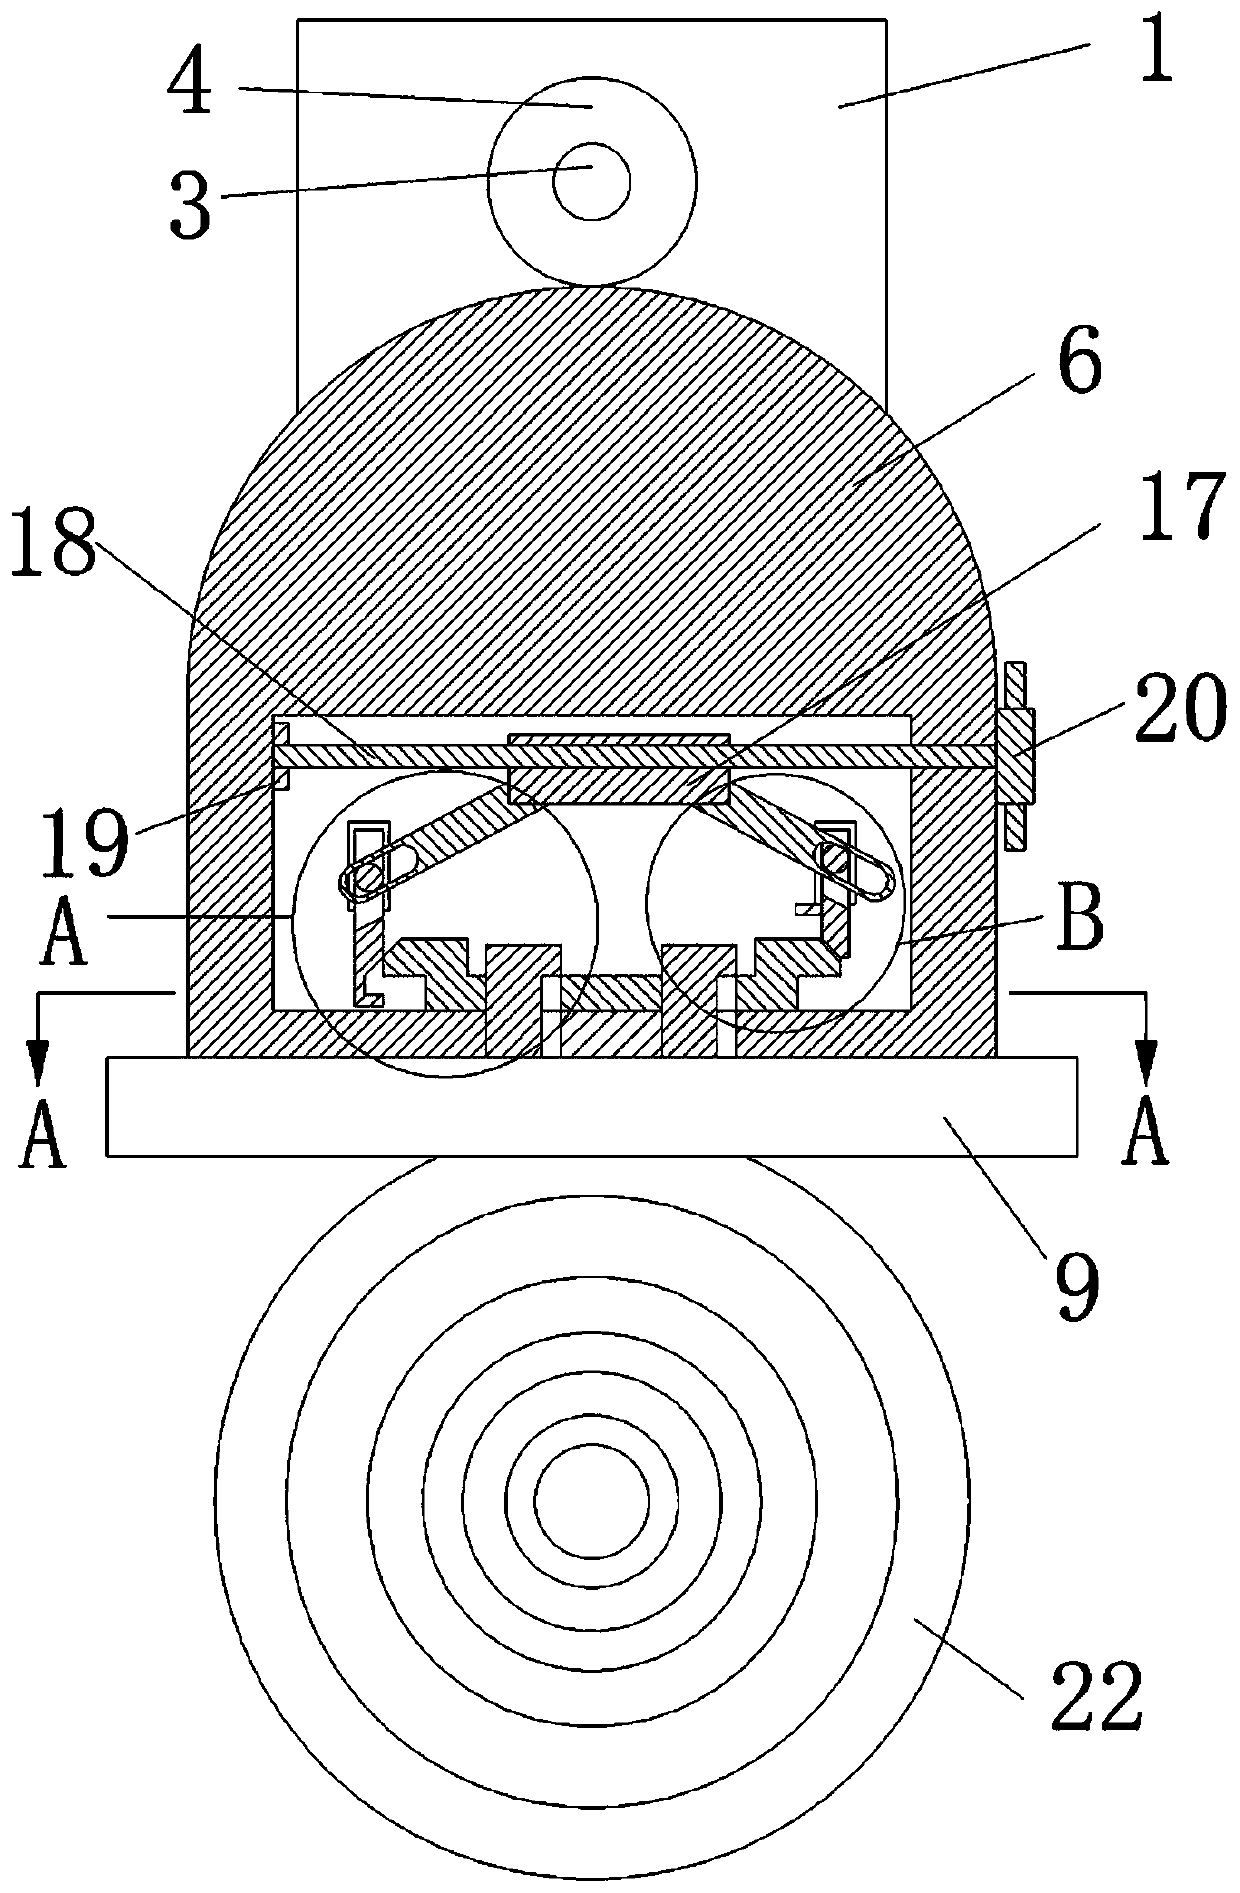 Rotary positioning mechanism for convenient replacement of target rings and its application method